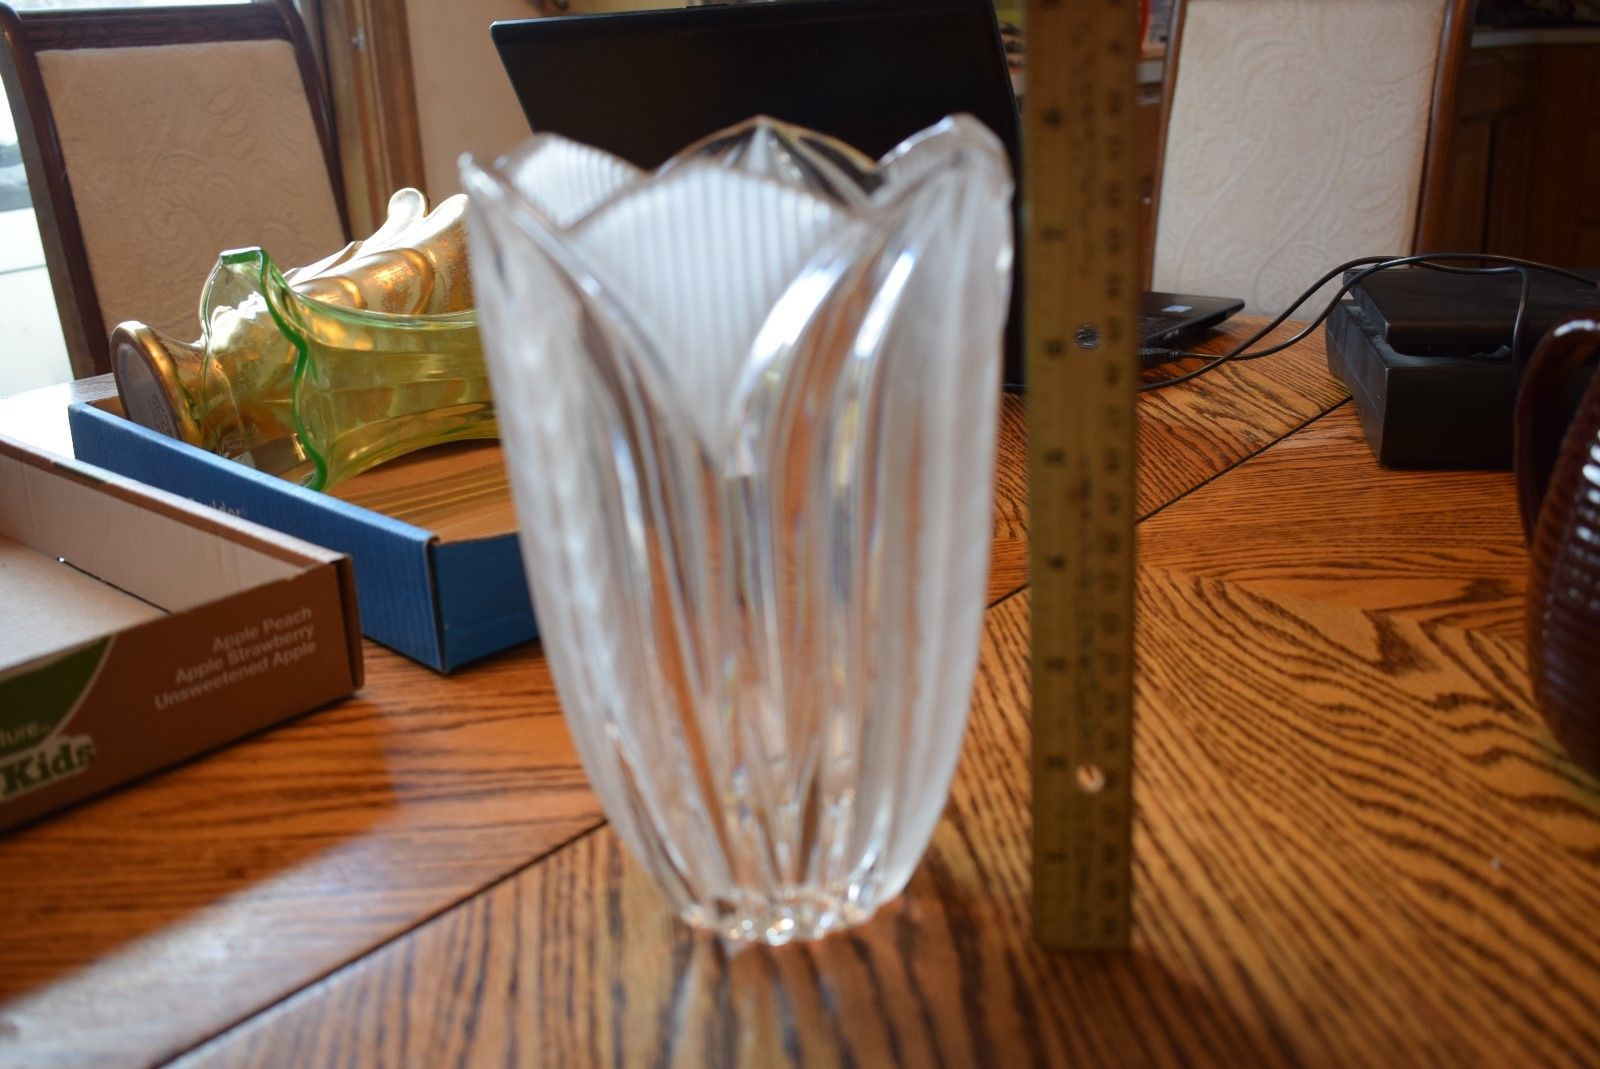 20 attractive Mikasa Florale Crystal Vase 2022 free download mikasa florale crystal vase of mikasa frost crystal vase pattern unknown tulip style 12 00 throughout mikasa frost crystal vase pattern unknown tulip style 1 of 1only 1 available